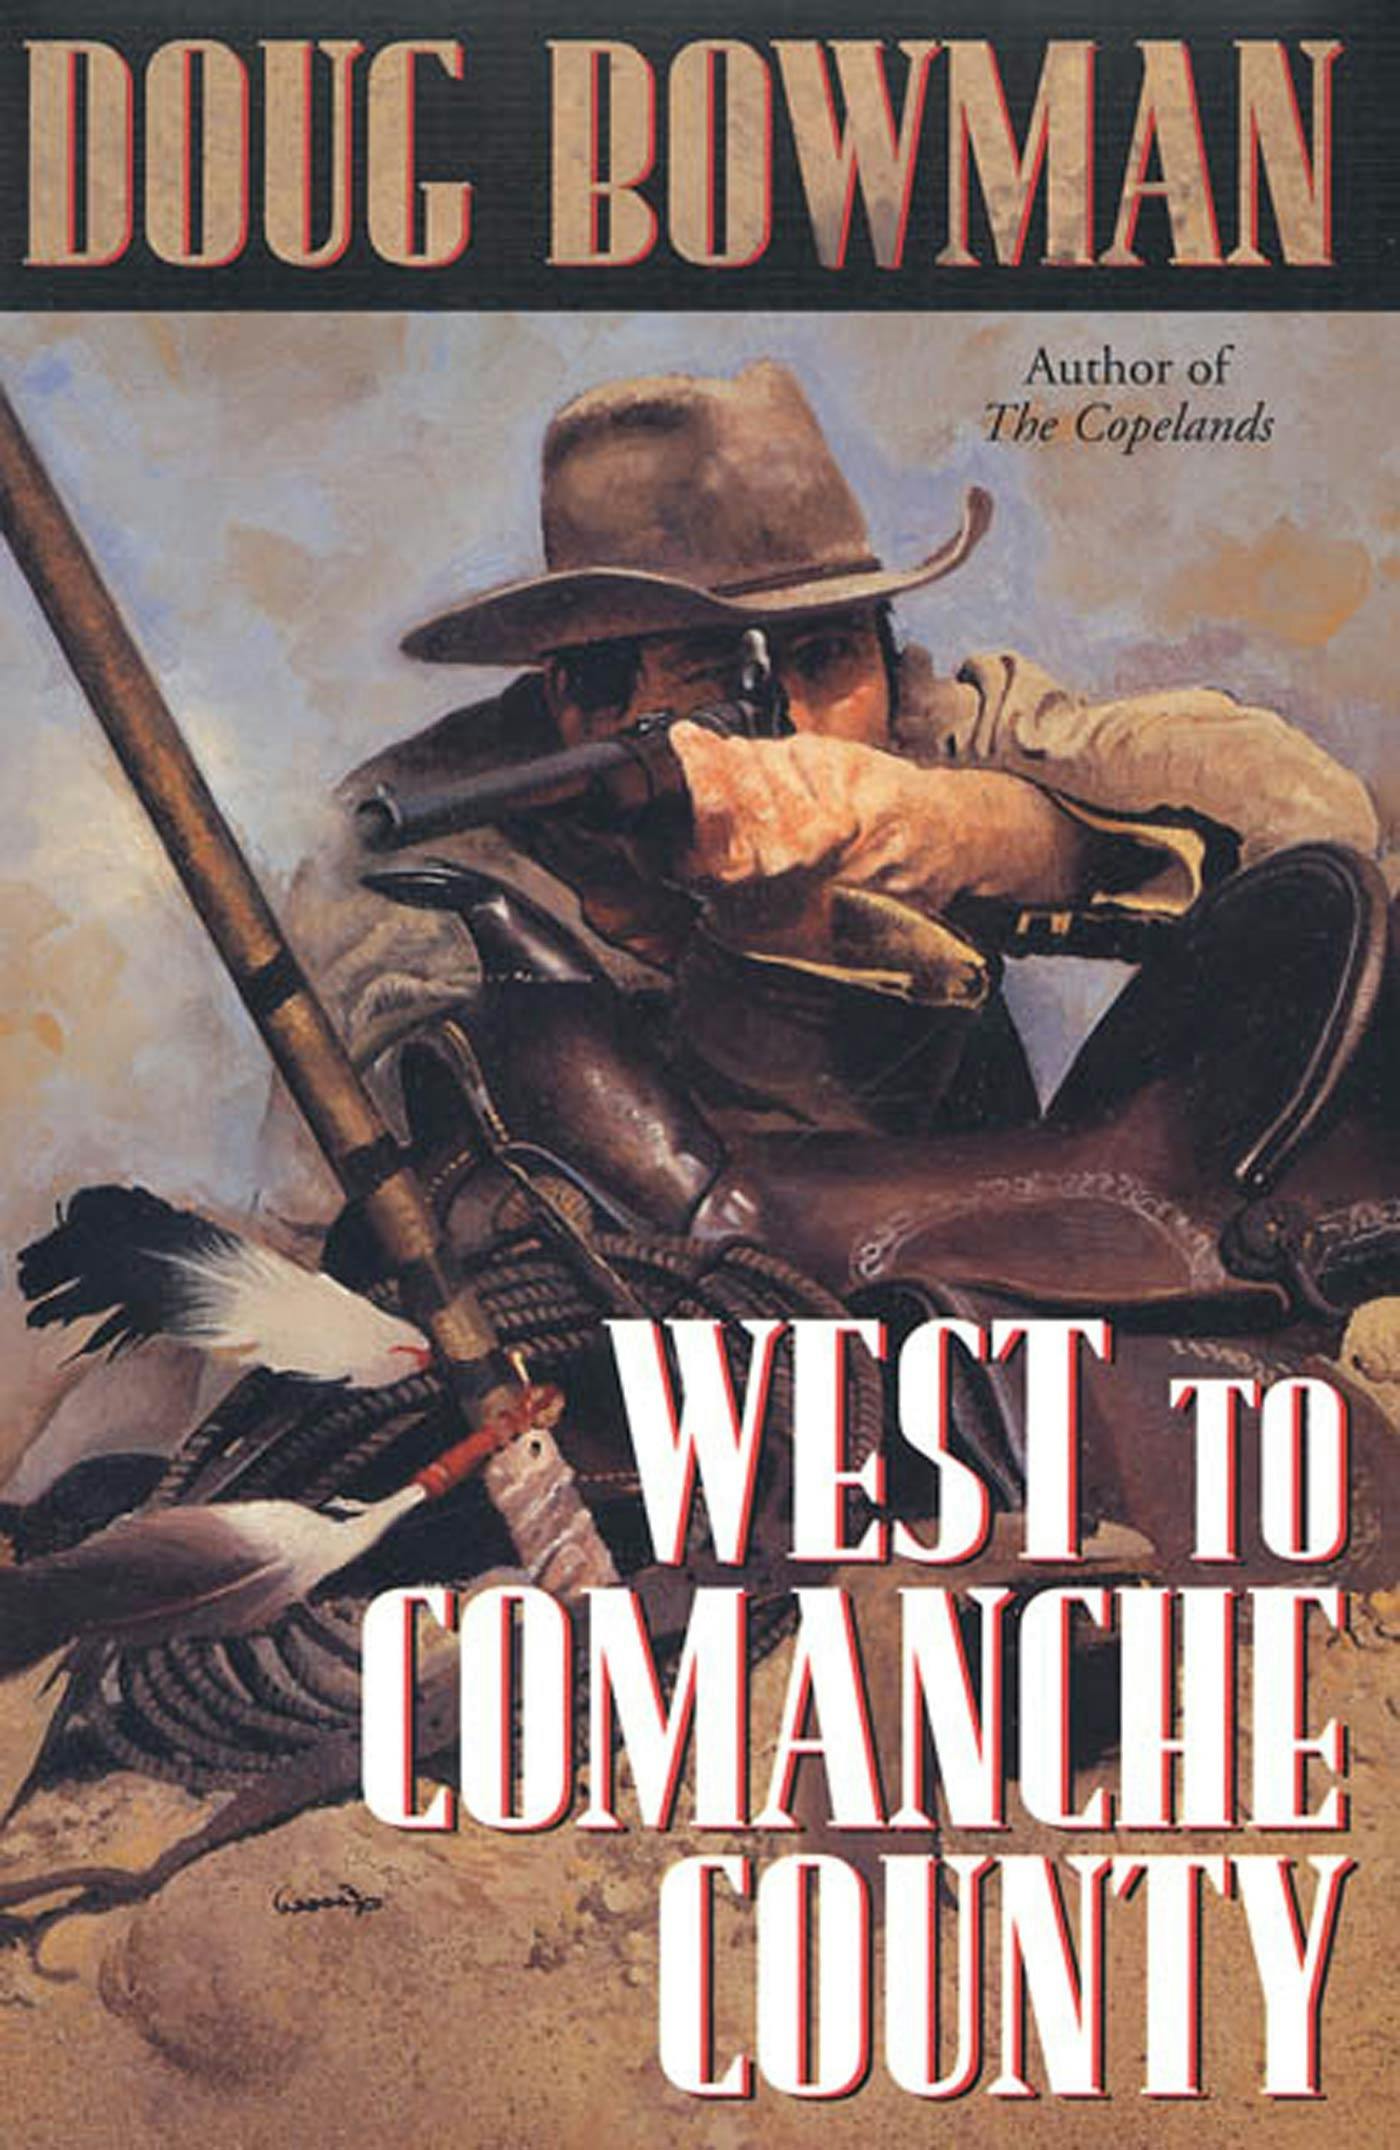 Cover for the book titled as: West To Comanche County